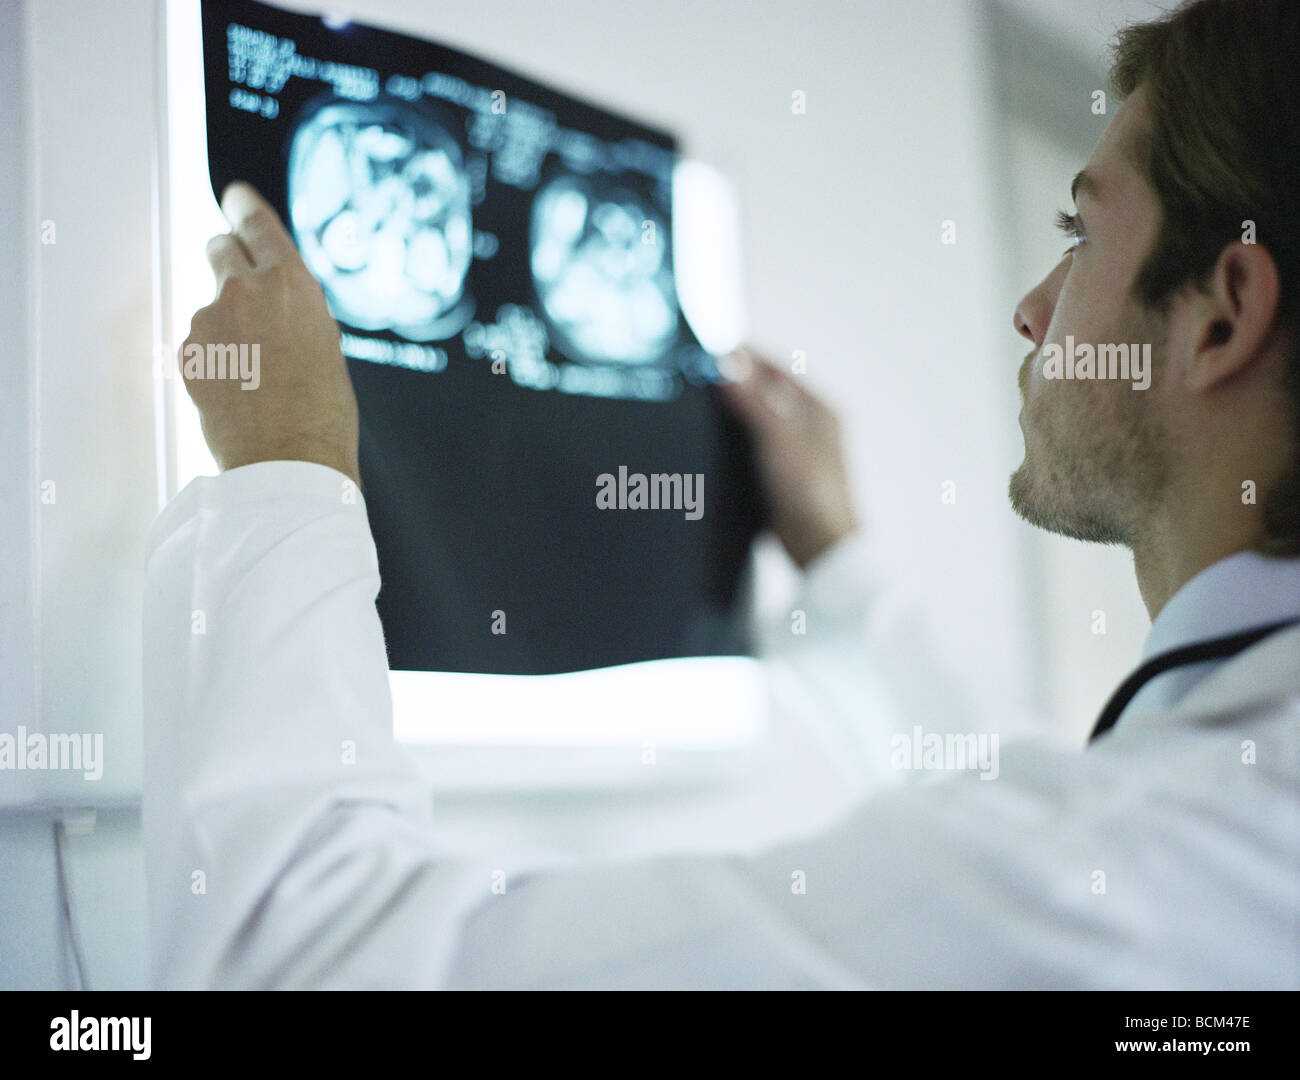 Doctor holding up and examining MRI images, rear view Stock Photo